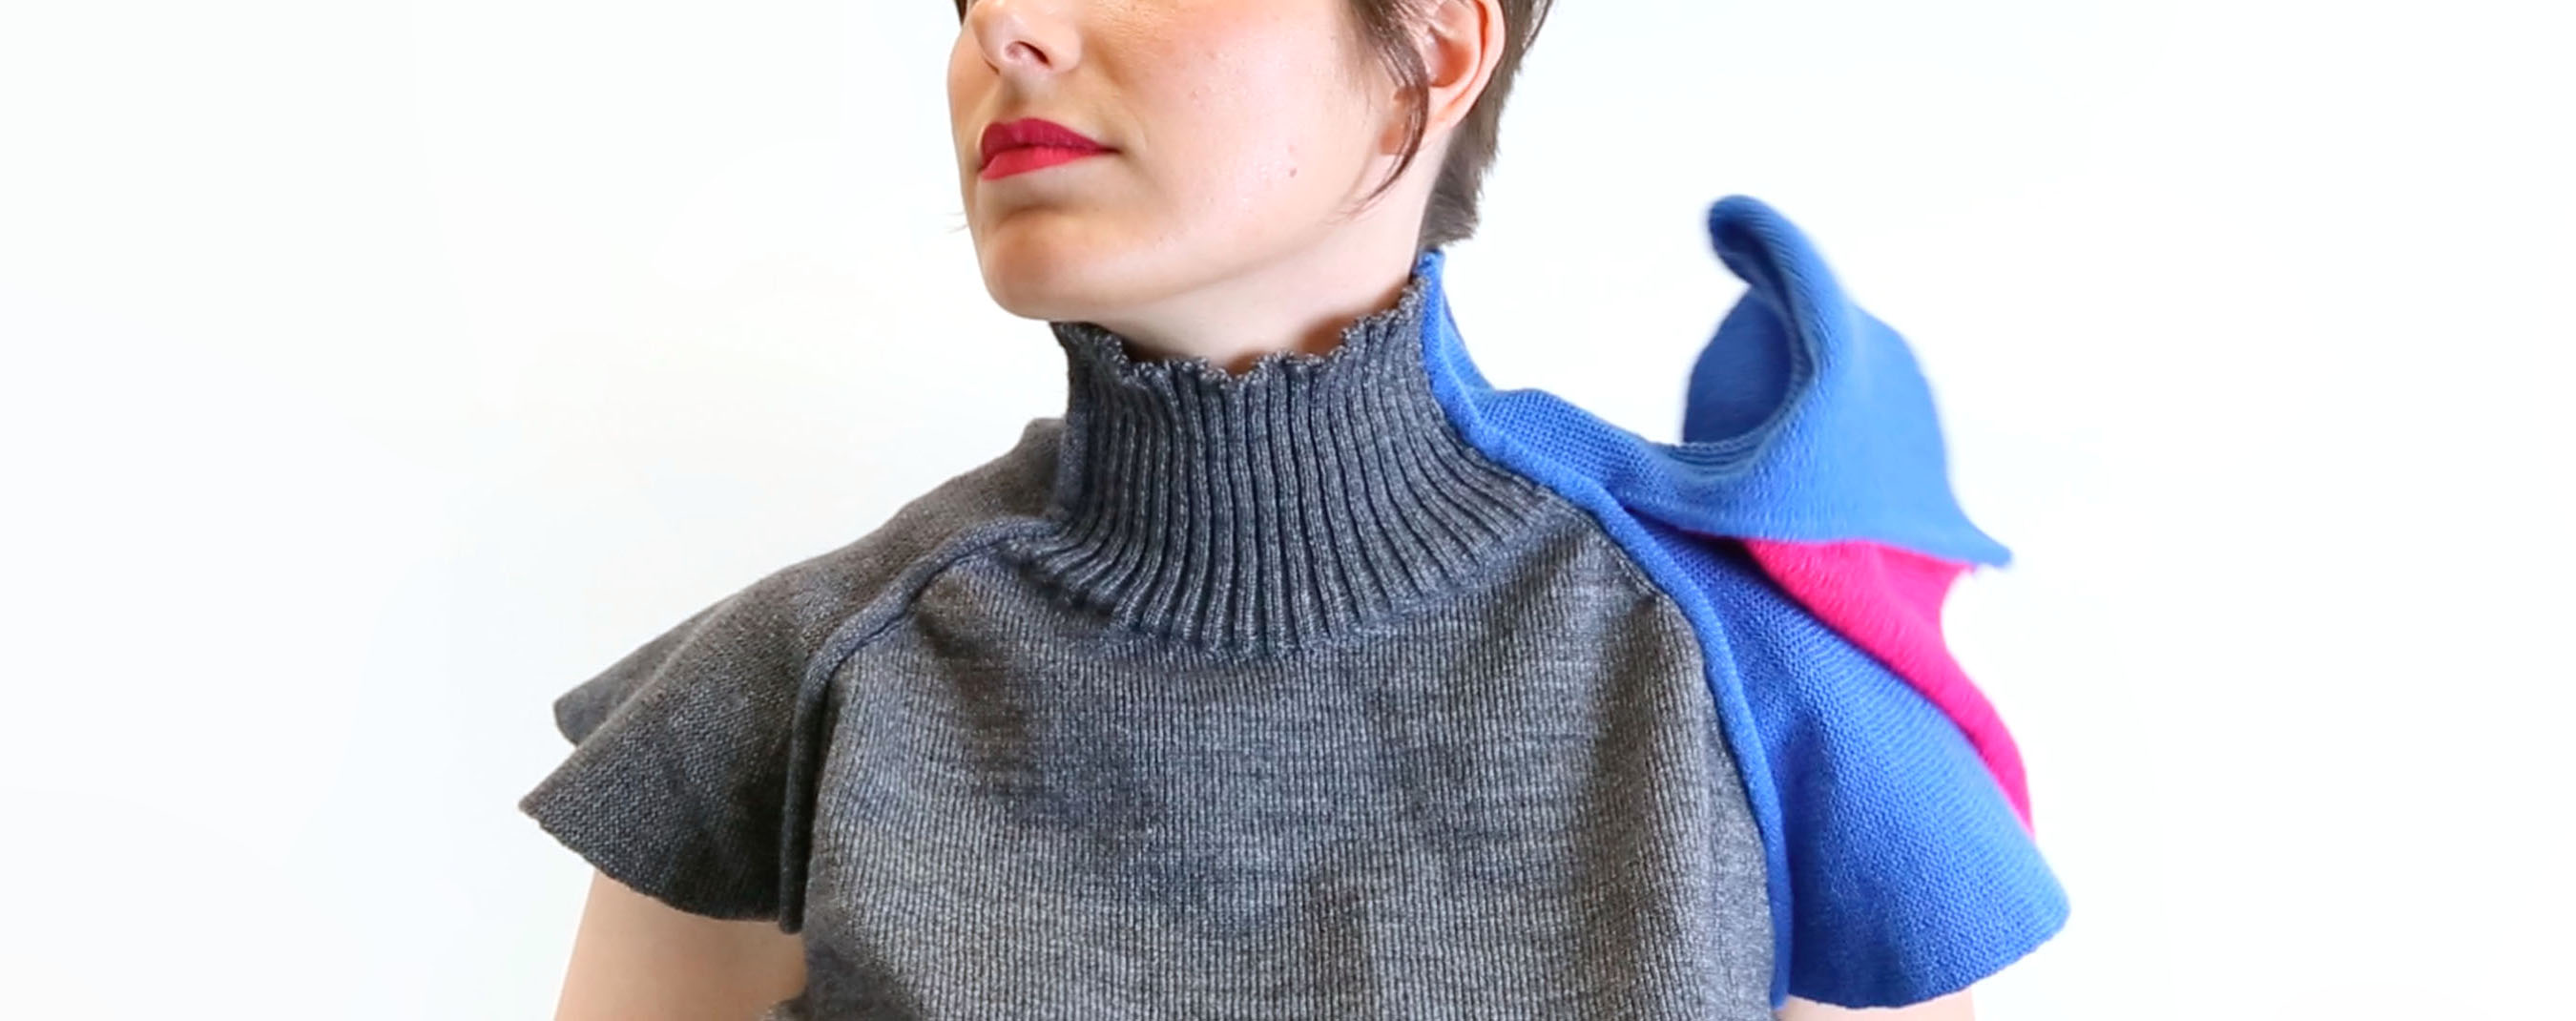 A sweater that can tap the wearer on the shoulder; after.